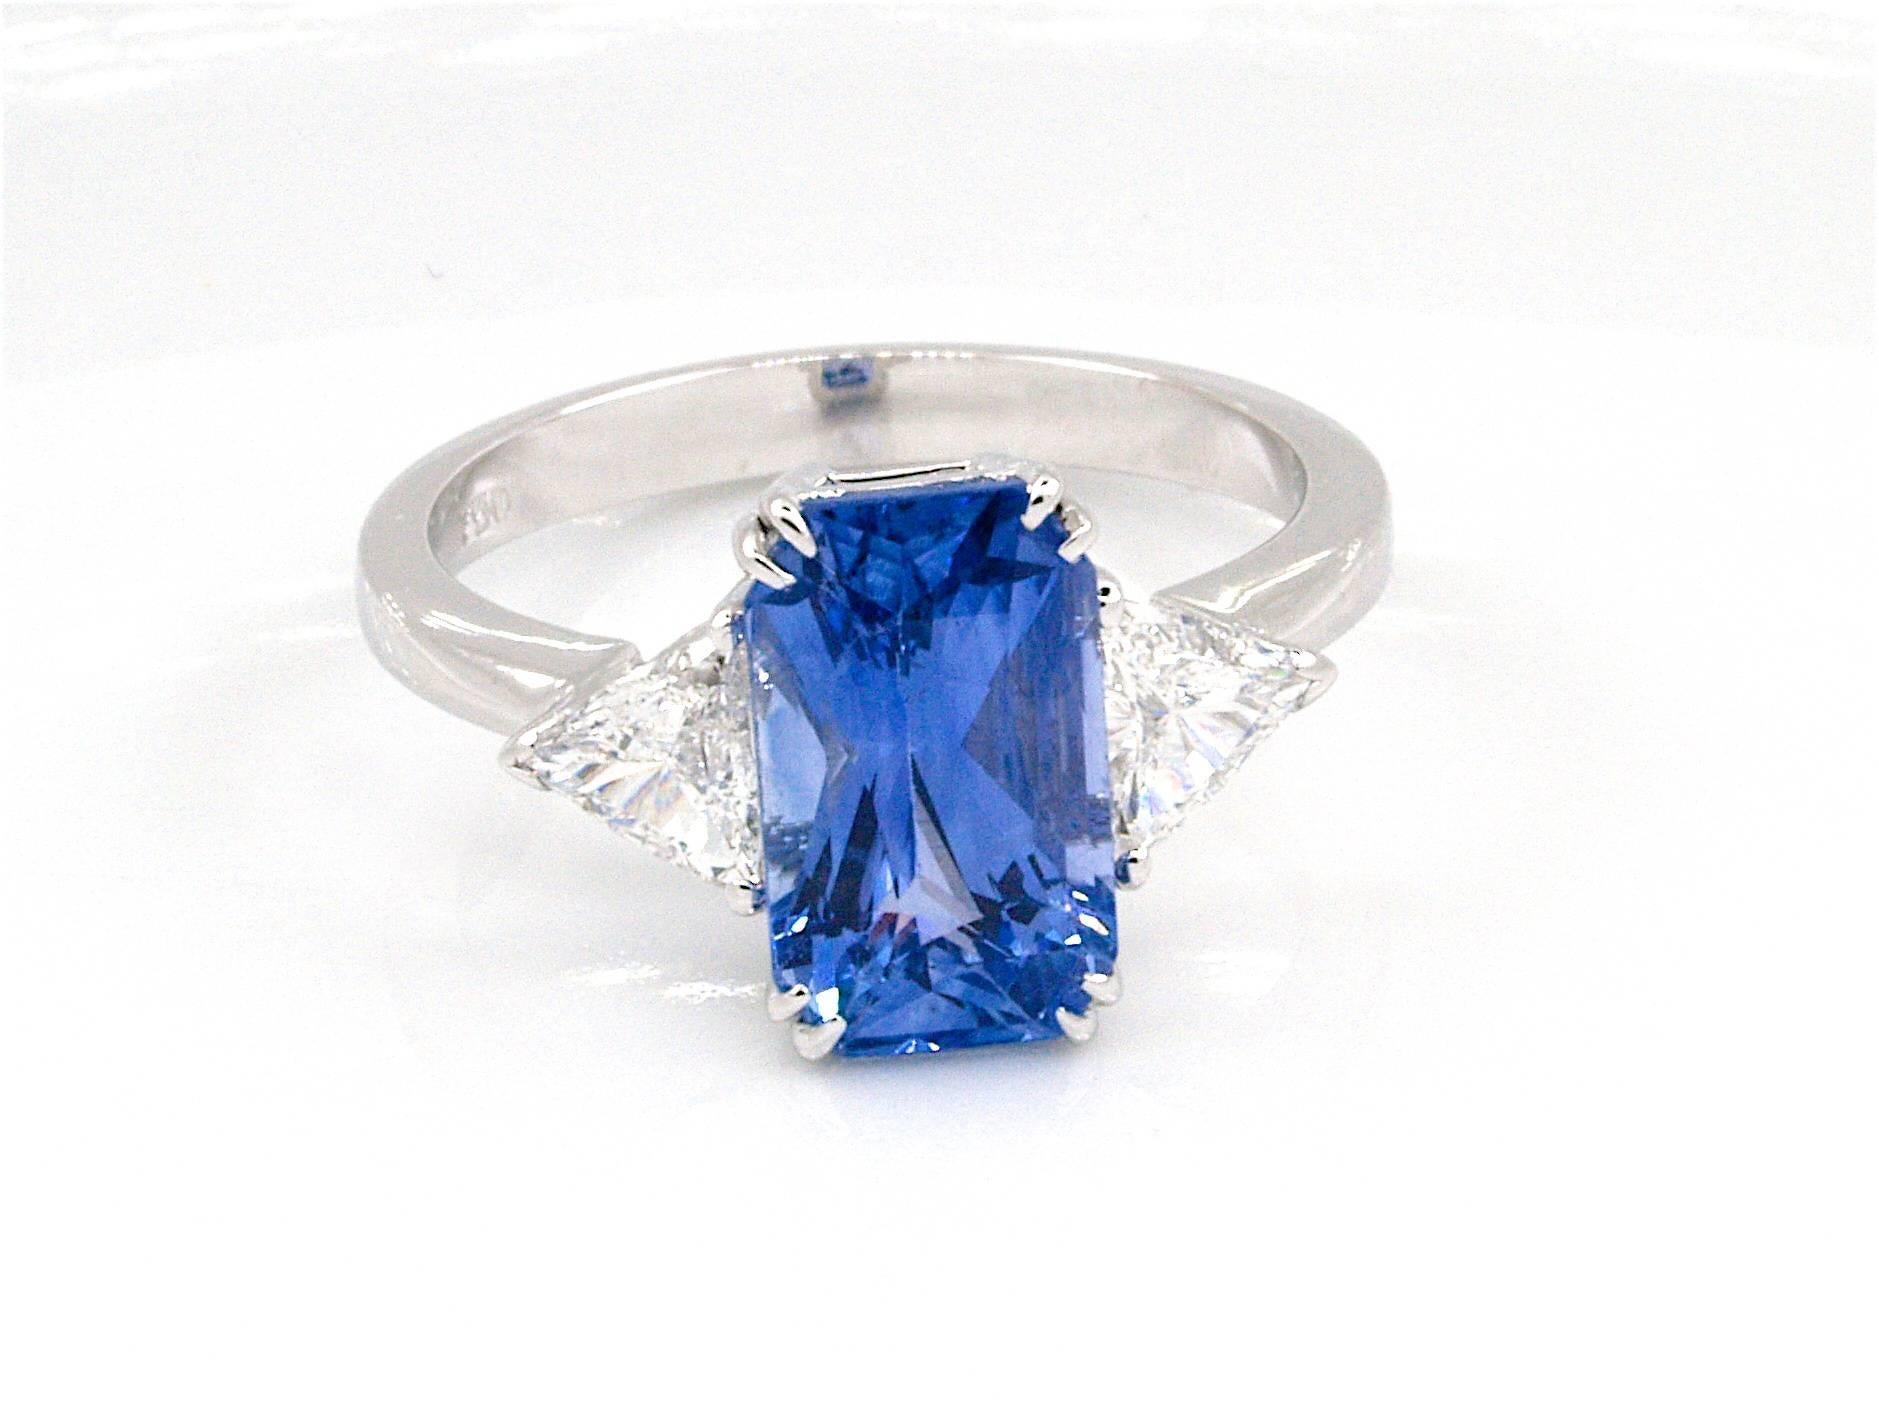              +++++++All realistic offers are welcome.+++++++

This sparkling Sapphire diamond ring is crafted in solid 18KT gold . It exposes at the center a natural corundum sapphire blue color with high transparency, measuring 10.77 x 6.37 x 5.18